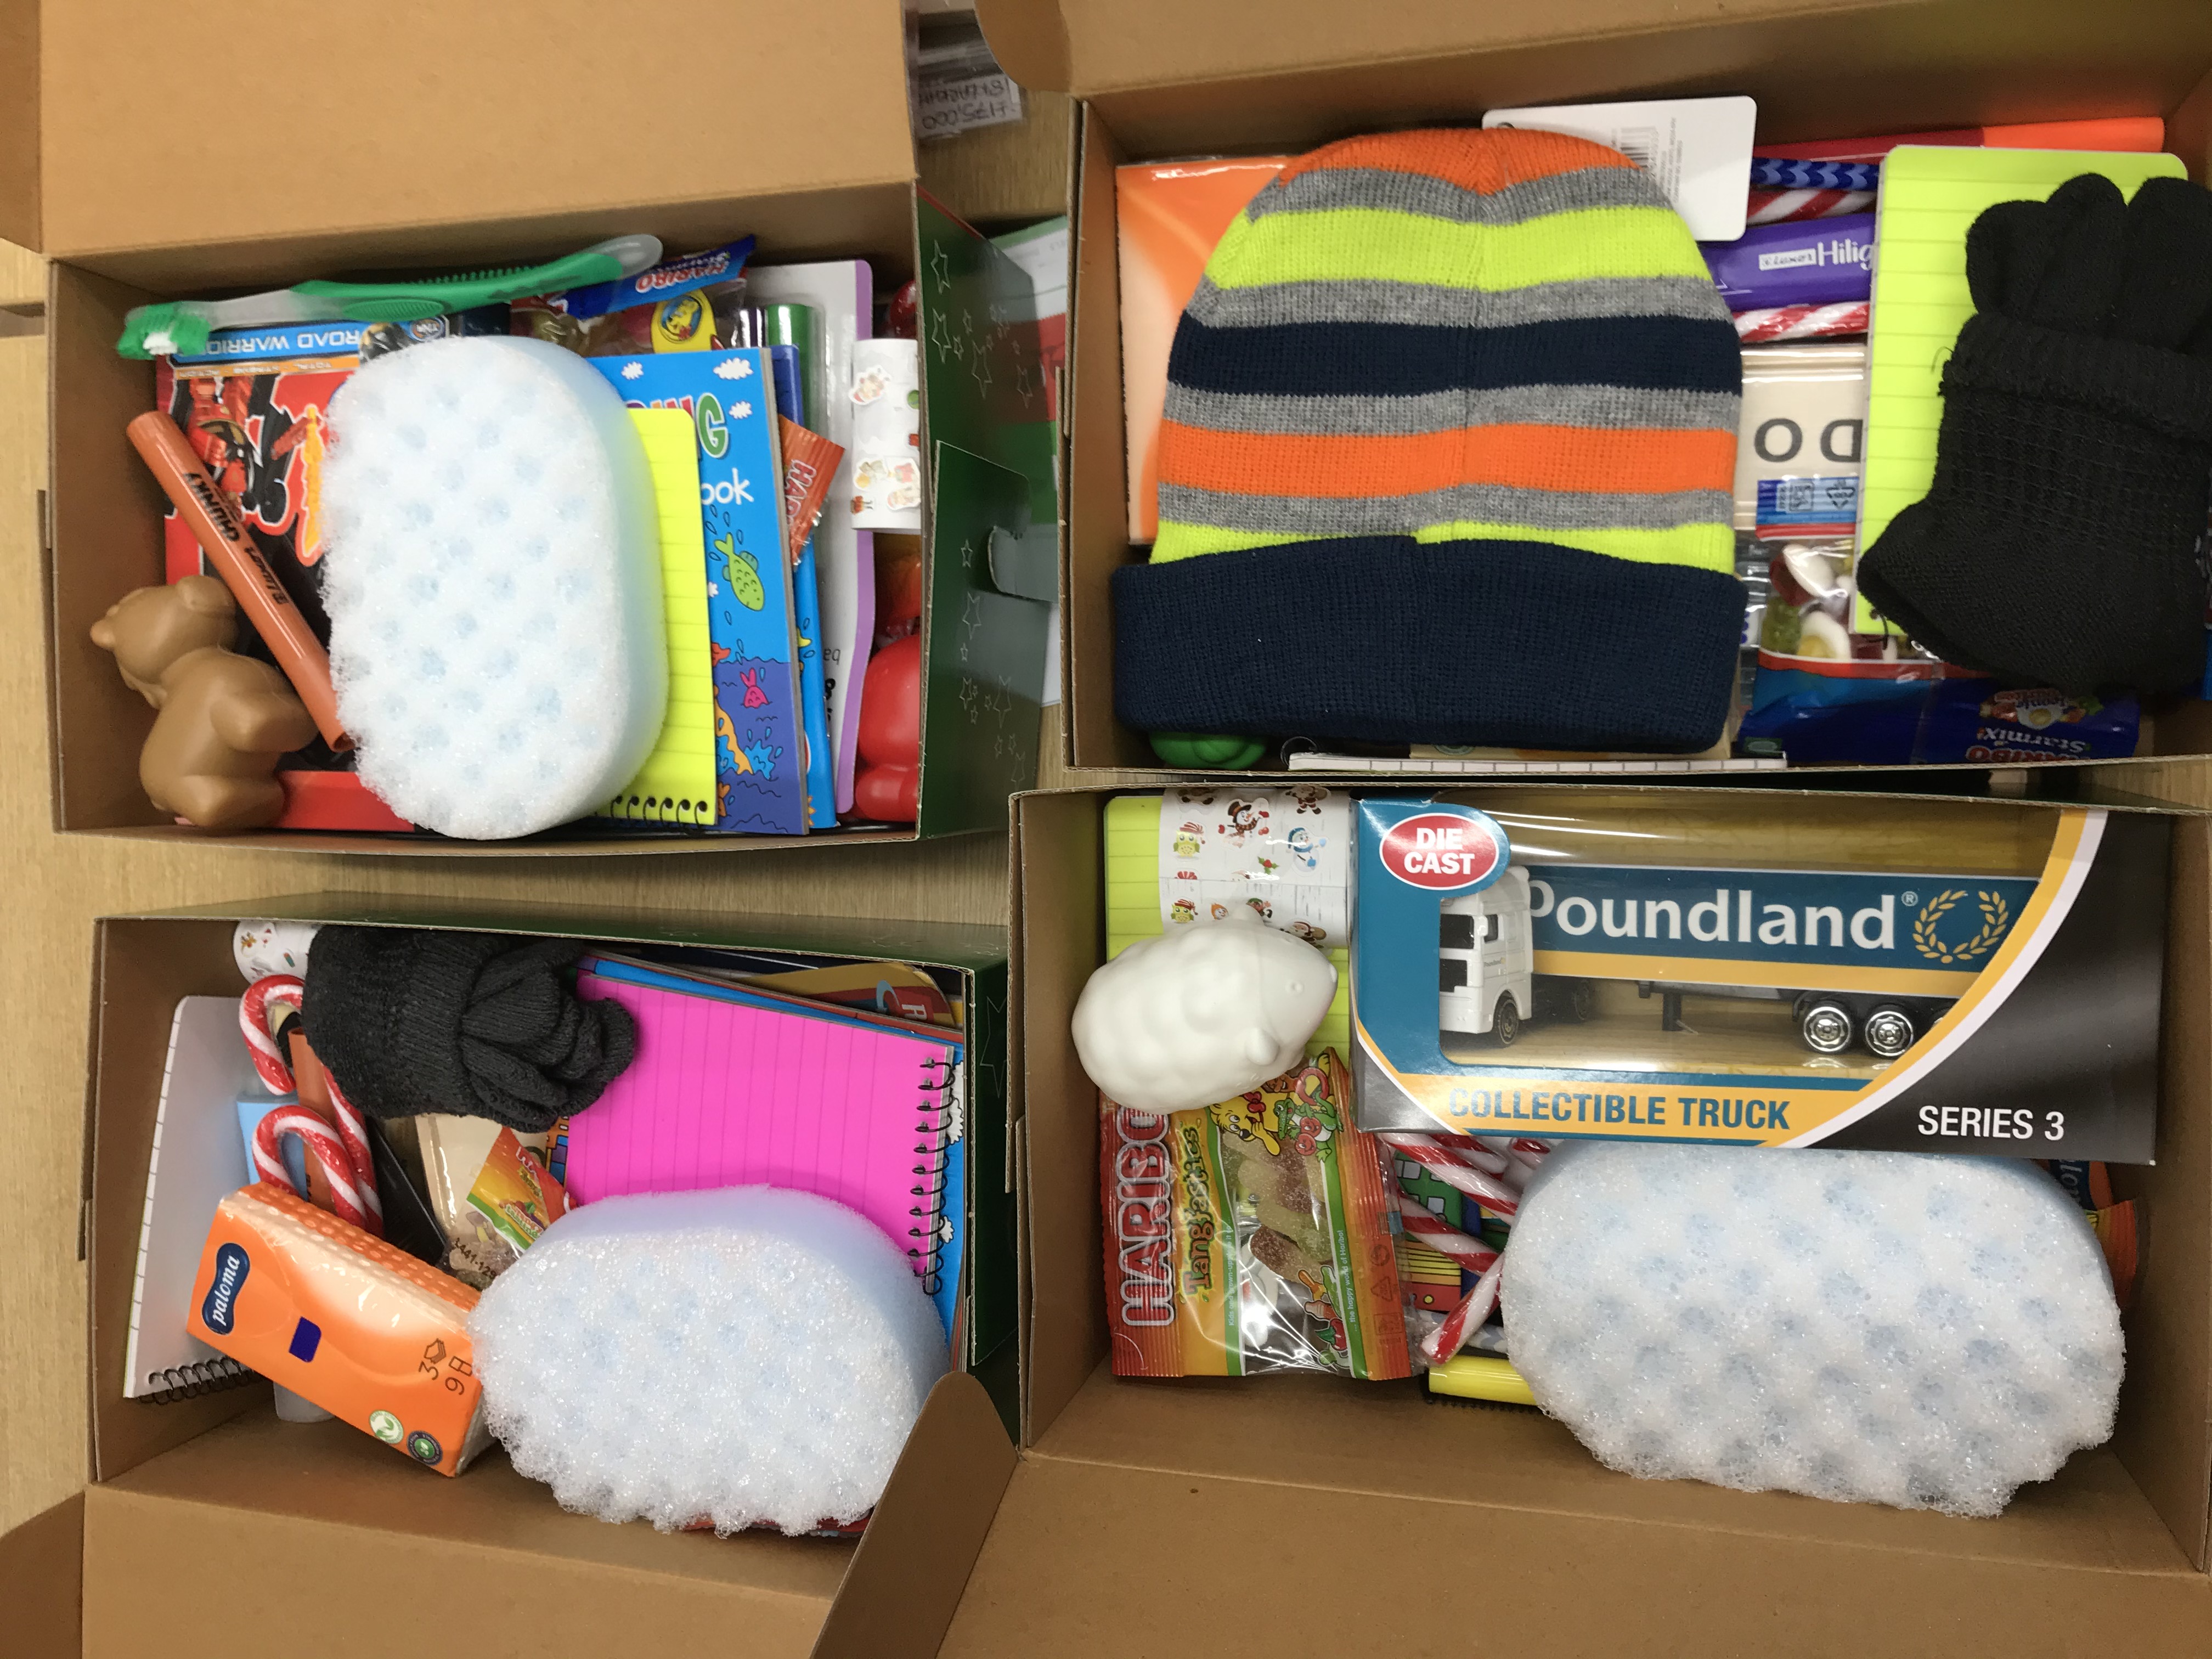 Samaritan's Purse: Collecting Shoeboxes for Operation Christmas Child